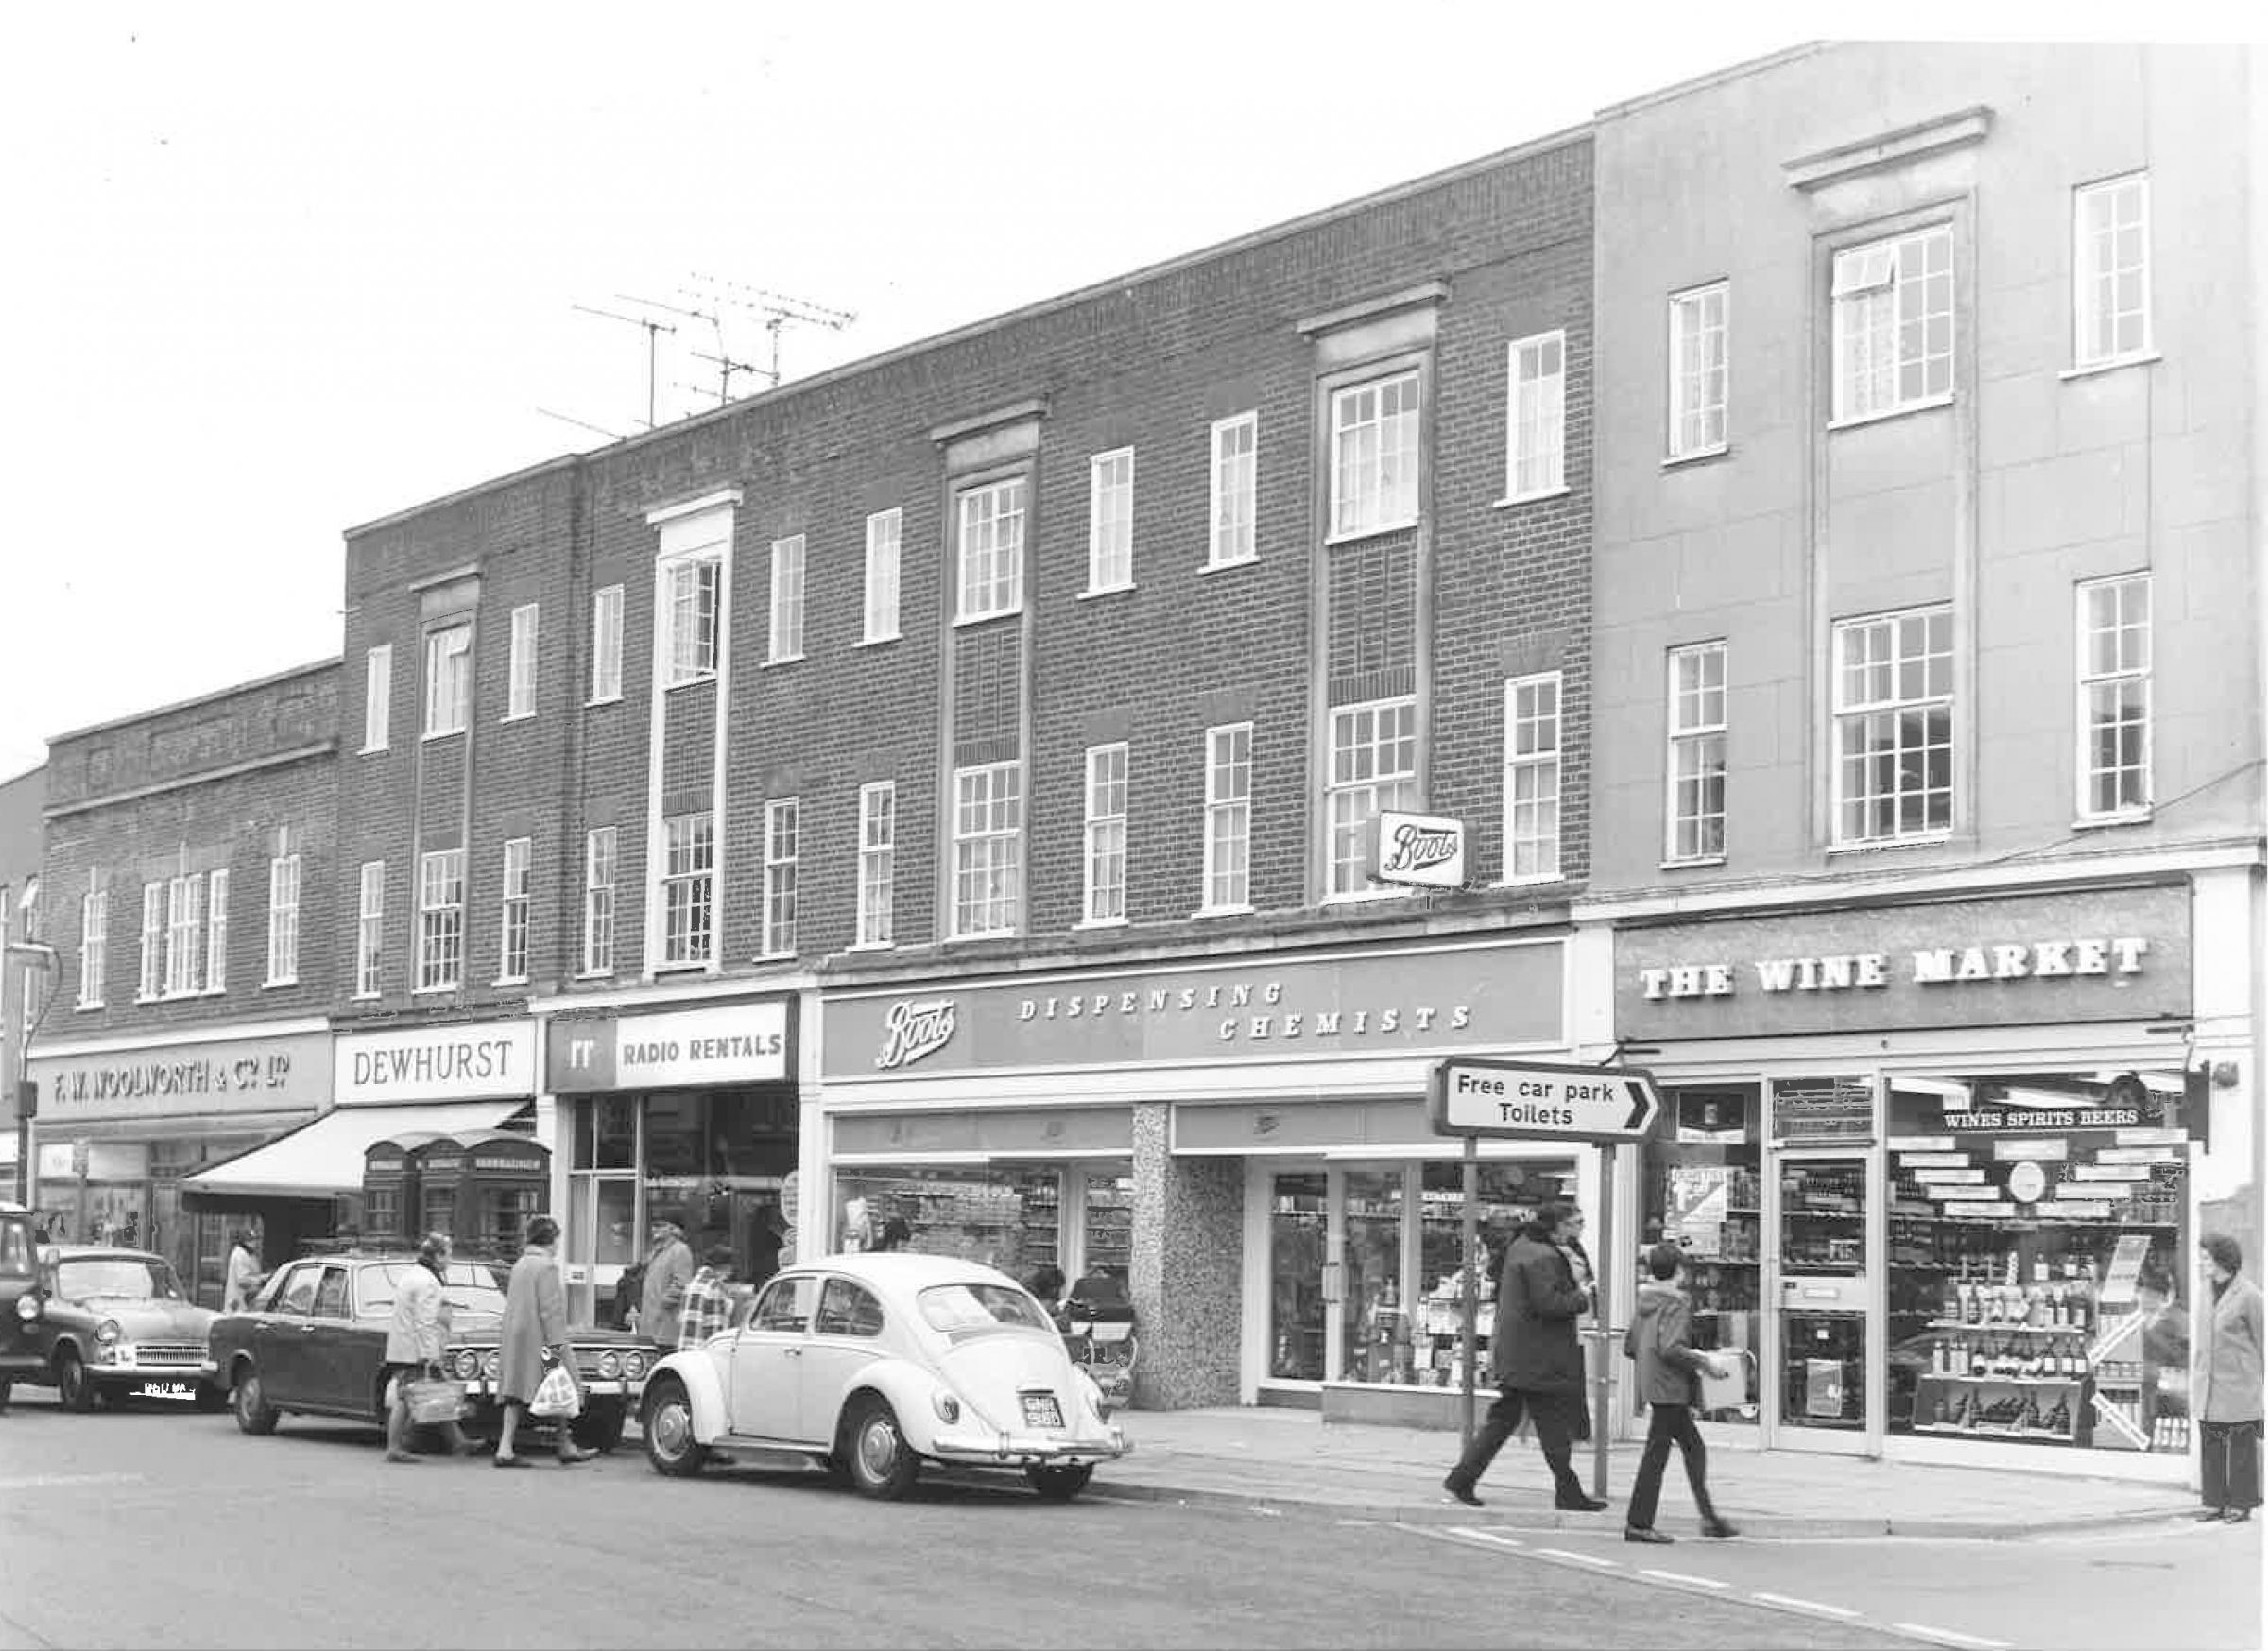 Boots, Radio Rentals, The Wine Market, Dewhurst and Woolworths in Ringwood.